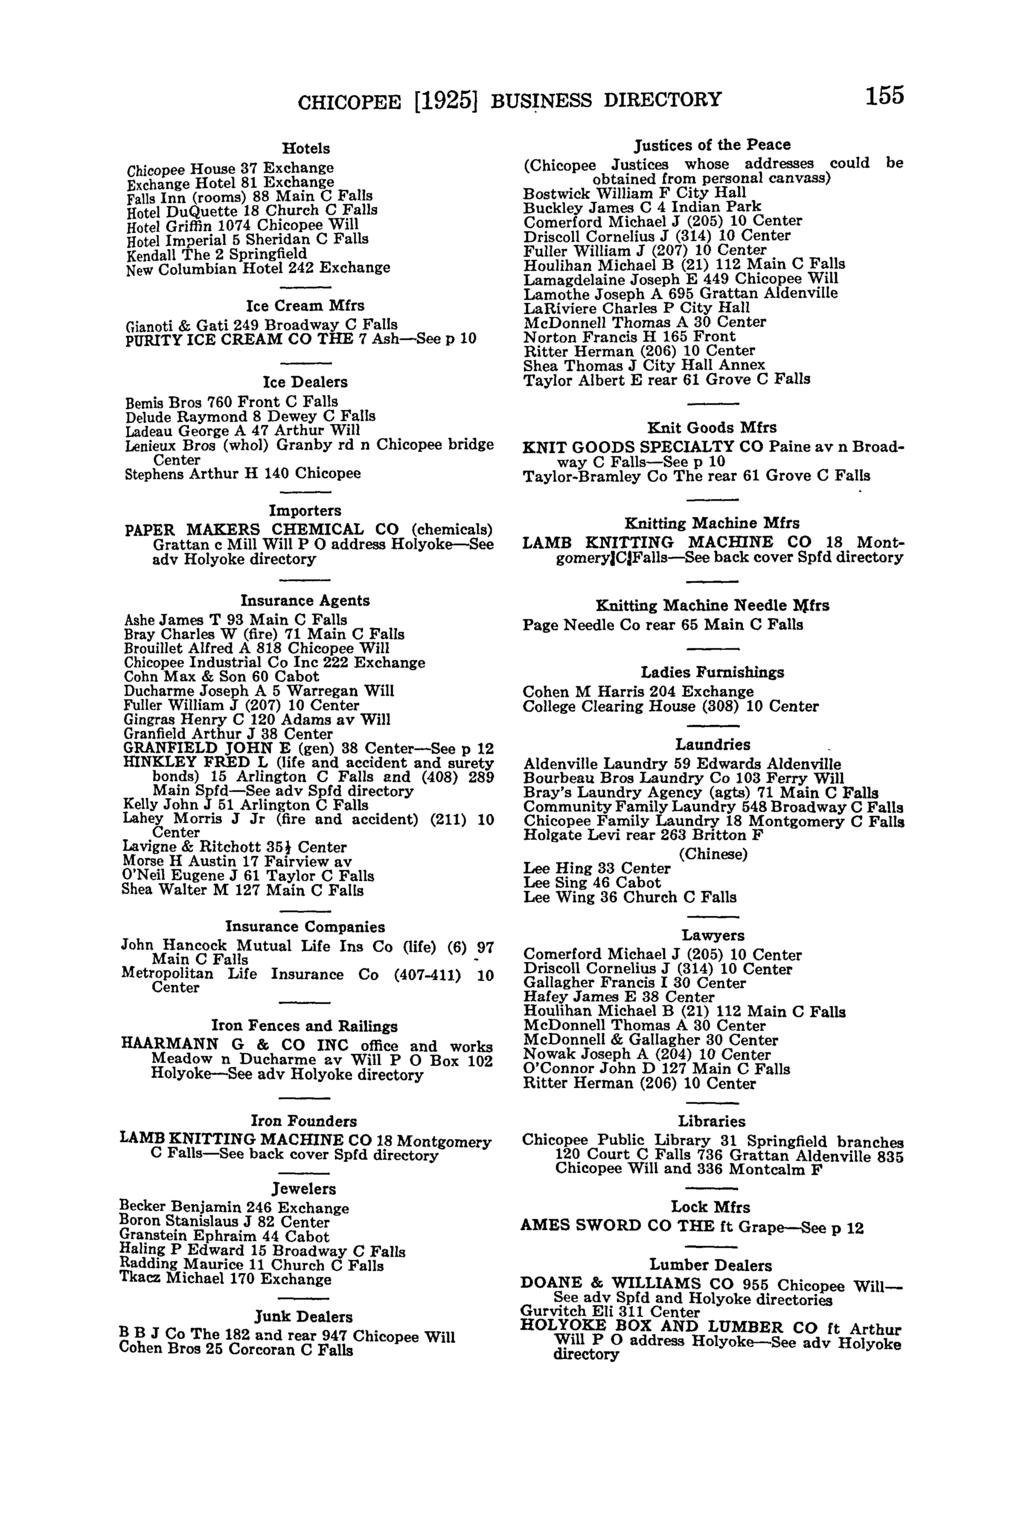 CHICOPEE [1925] BUS~NESS DIRECTORY 155 Hotels Chicopee House 37 Exchange Exchange Hotel 81 Exchange Inn (rooms) 88 Main Hotel DuQuette 18 Church Hotel Griffin 1074 Chicopee Hotel Imperial 5 Sheridan